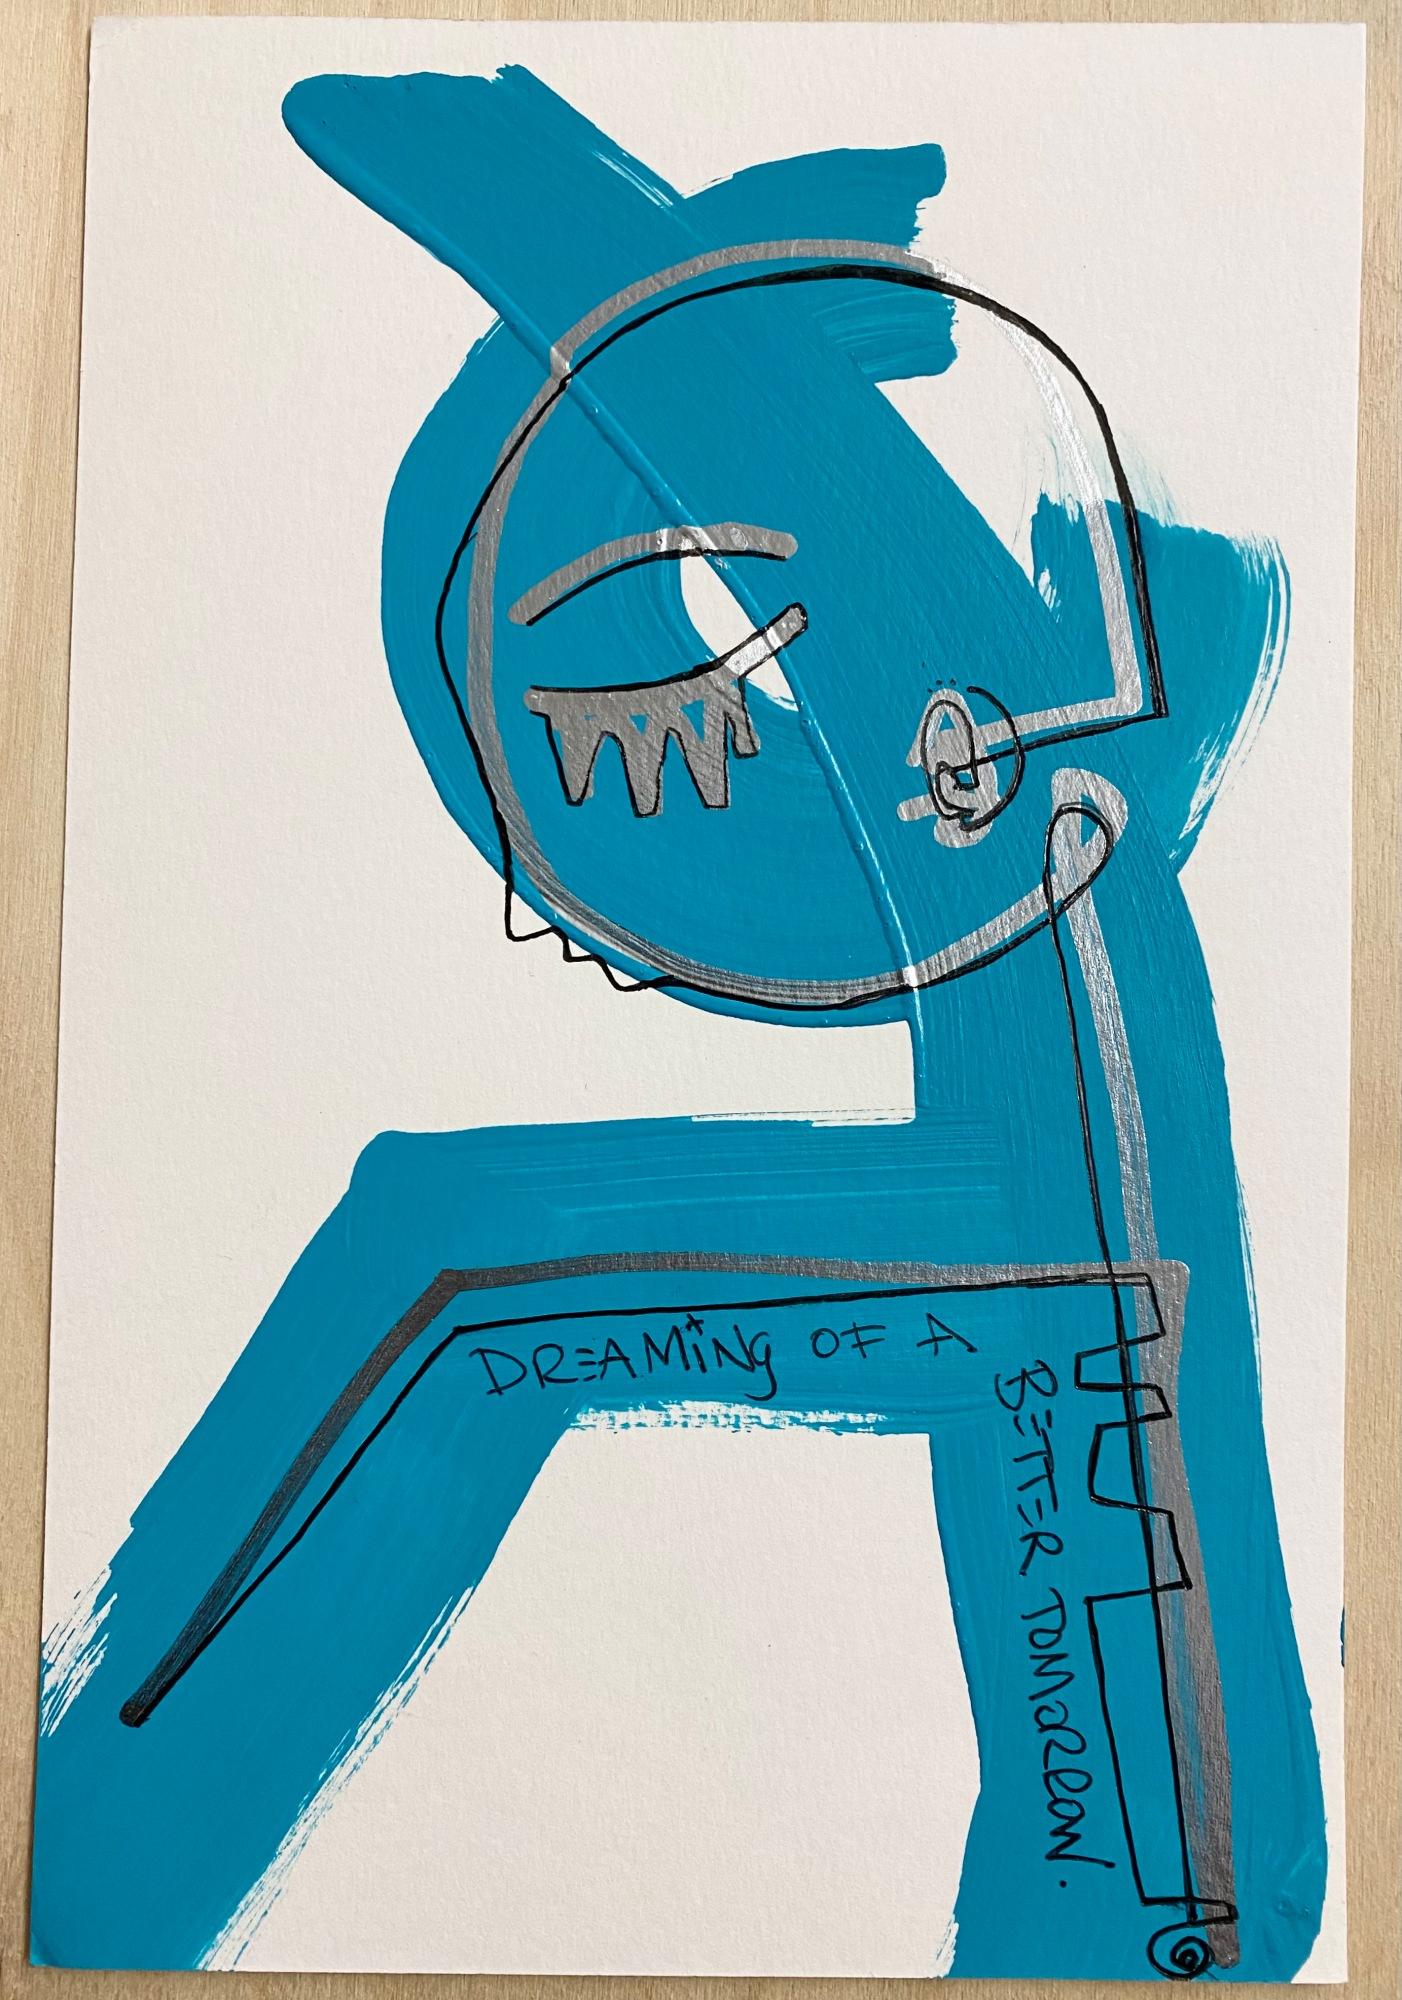 Teal brushstroke of a figure with eyes closed on watercolor paper with black and chrome line work.
Dreaming of a Better Tomorrow, acrylic, chrome on watercolor by Alice Mizrachi.  Original signed by artist.

ARTIST BIO Alice Mizrachi is a New York